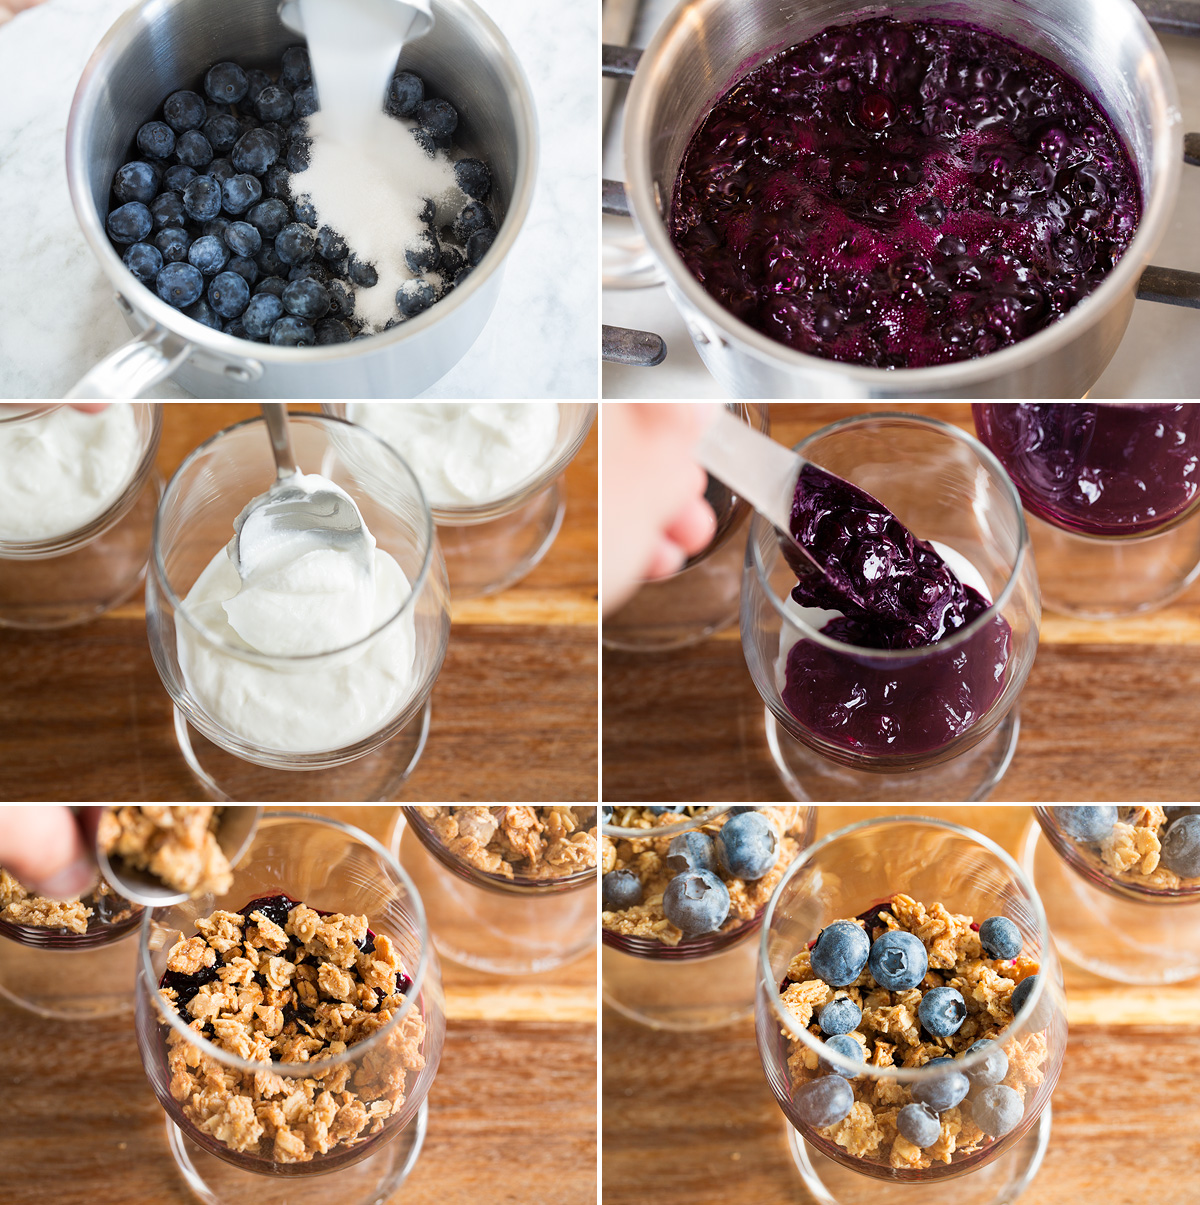 Collage of six photos showing steps of preparing fruit compote and layering a yogurt parfait with yogurt, fruit compote and granola.